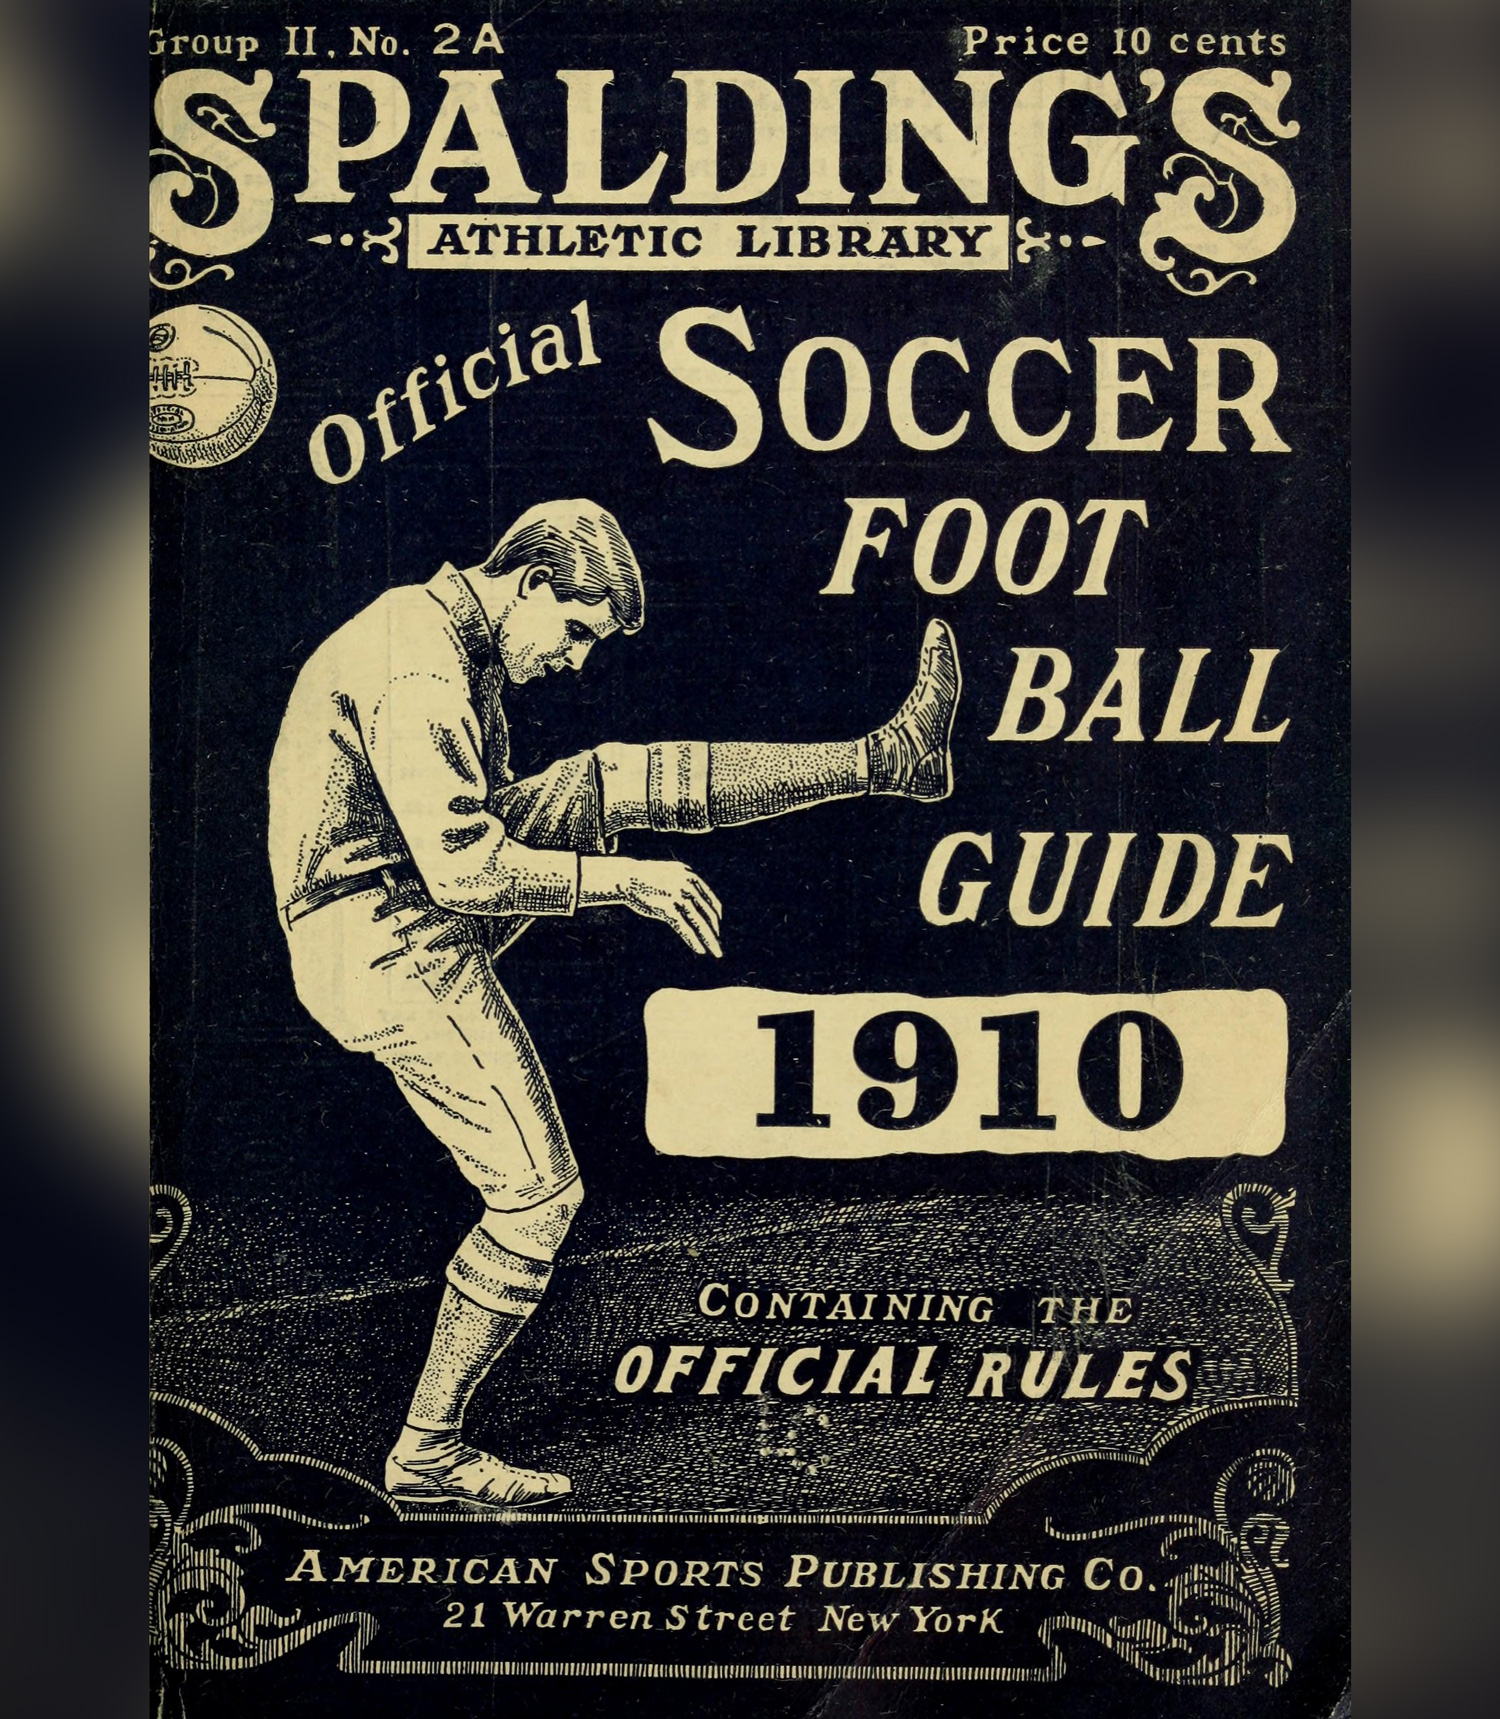 The cover of a soccer football guide from 1910 shows an athlete in uniform.